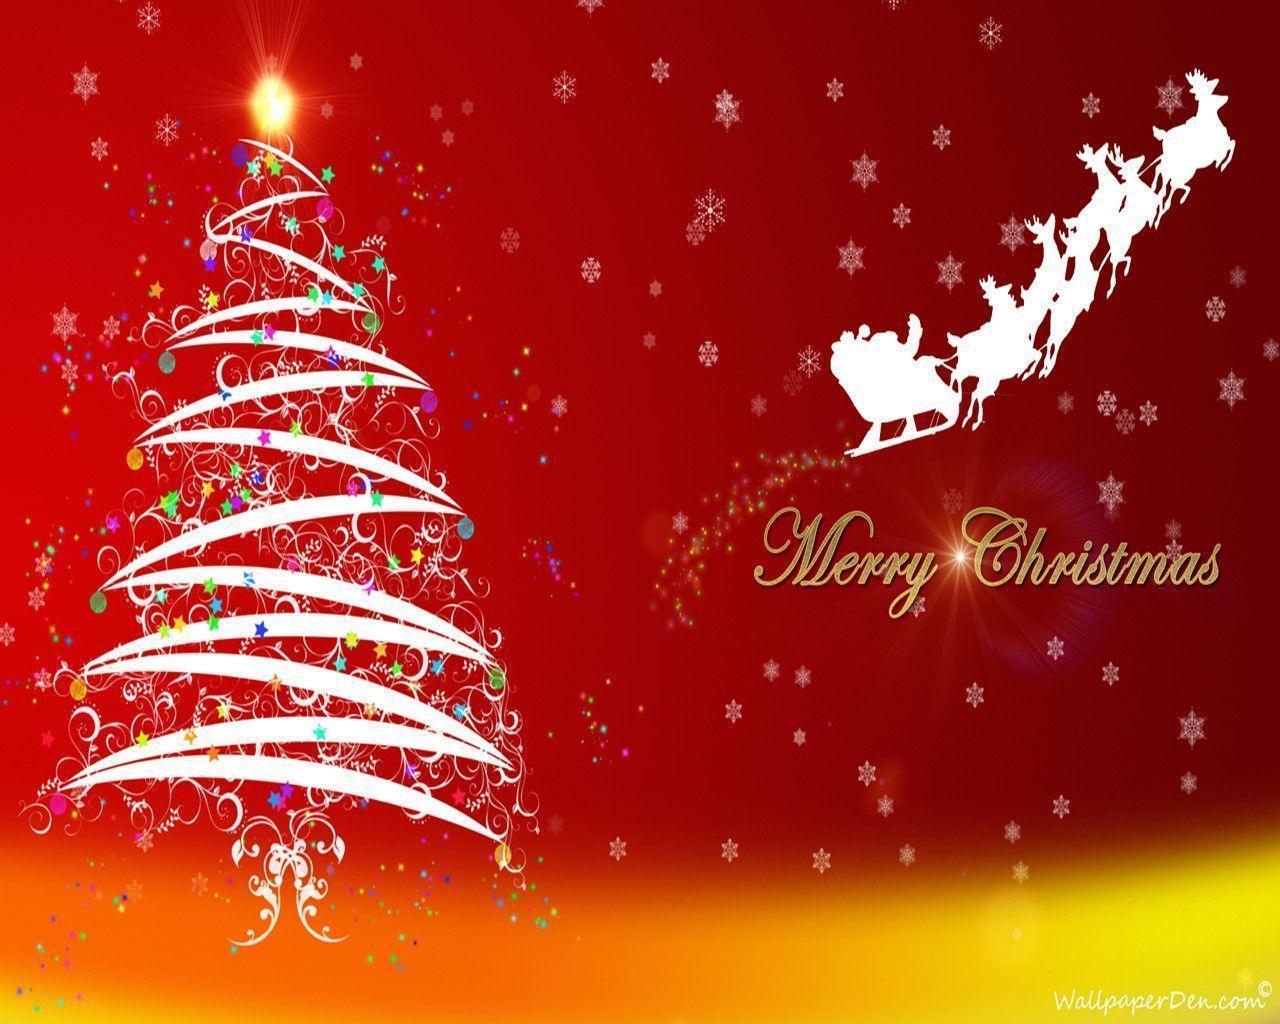 Merry Christmas Wallpapers Free  Wallpaper Cave